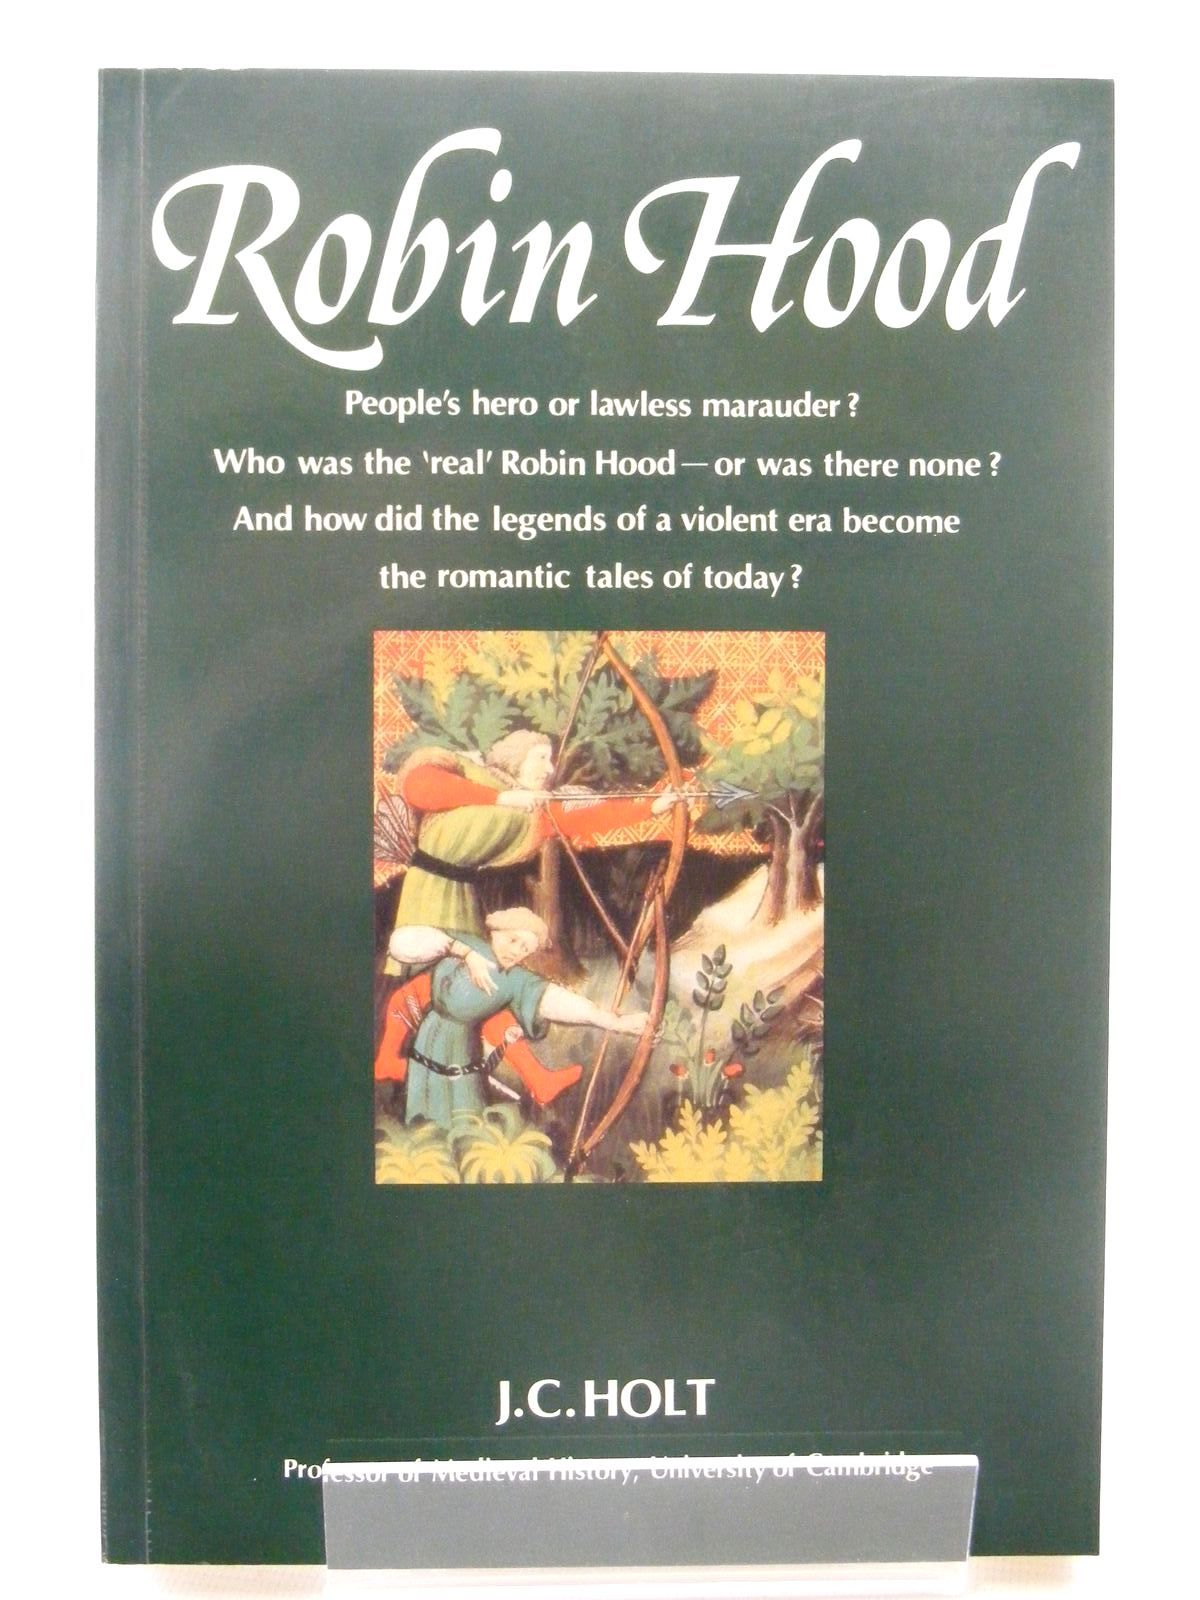 Photo of ROBIN HOOD written by Holt, J.C. published by Thames and Hudson (STOCK CODE: 1815959)  for sale by Stella & Rose's Books